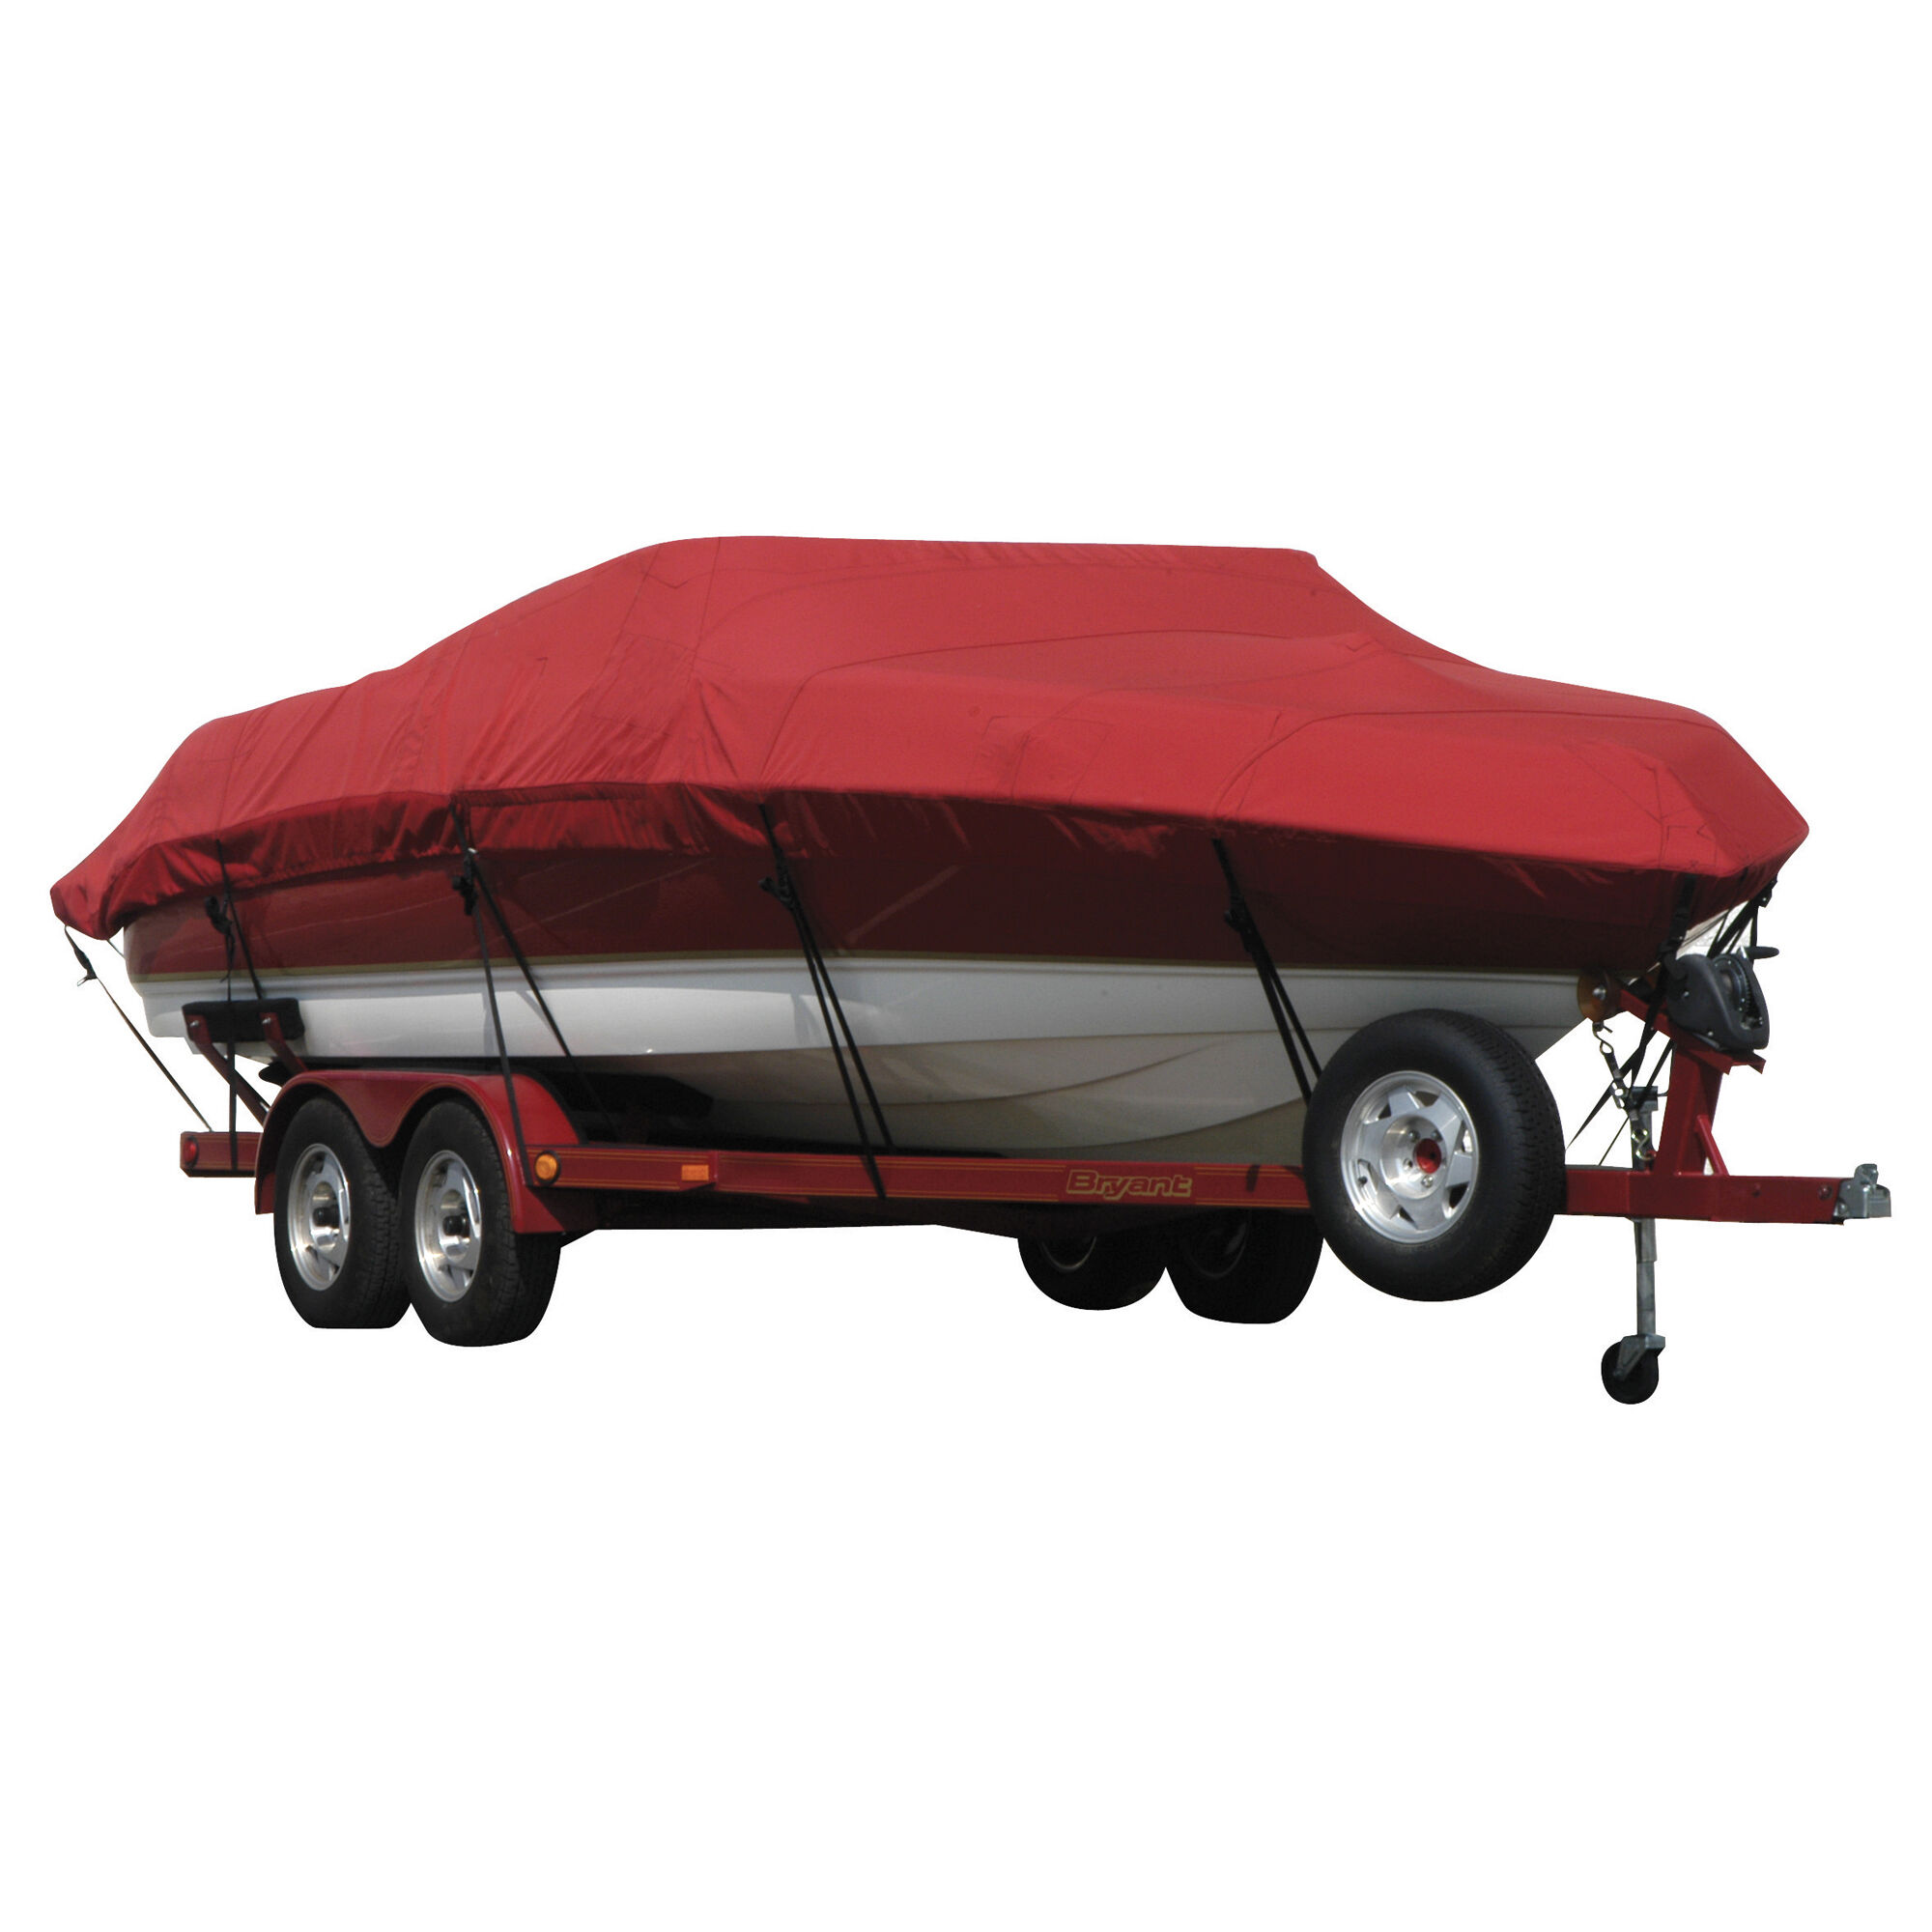 Covermate Exact Fit Sunbrella Boat Cover for Campion Chase 800 Chase 800 I/O. Red Acrylic